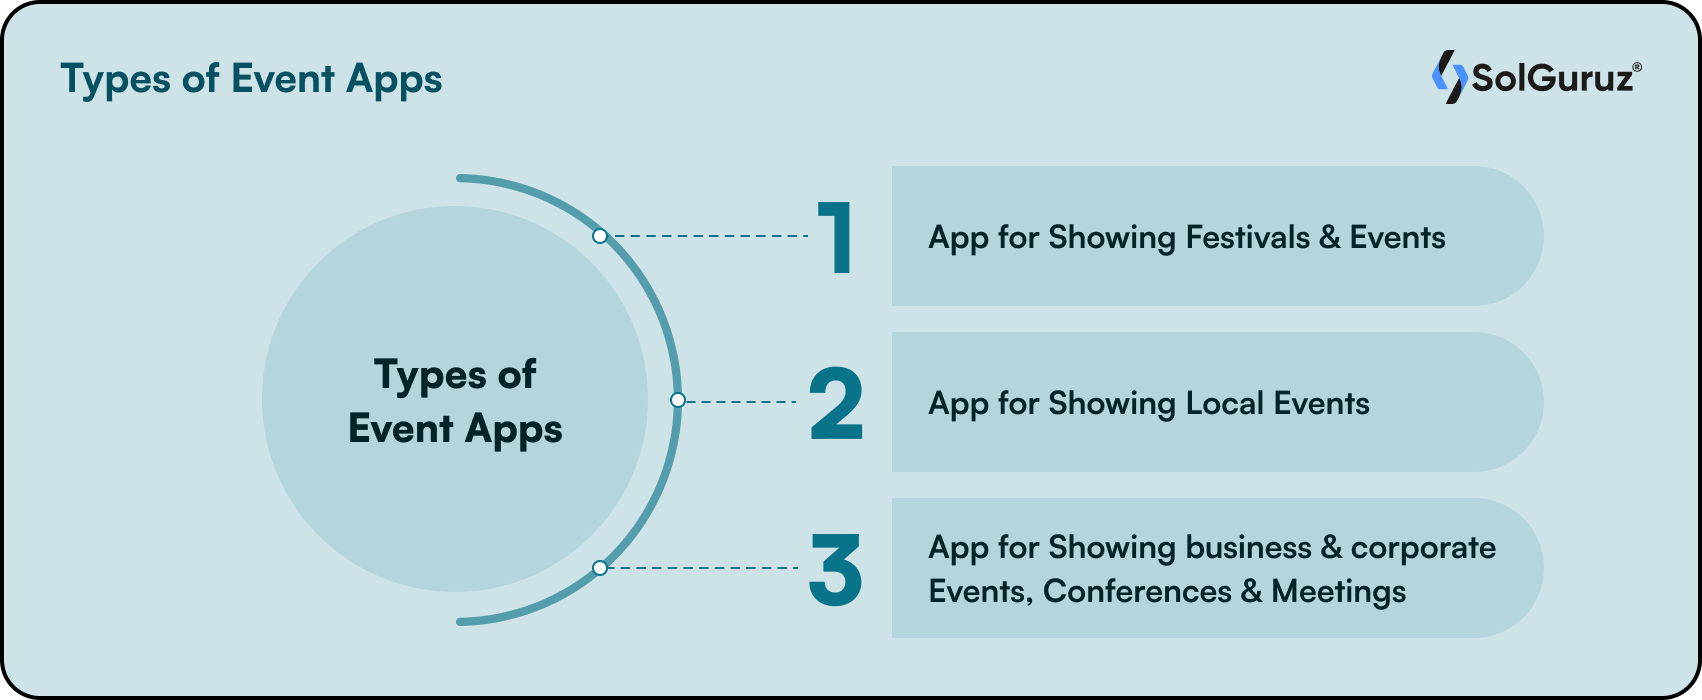 Types of Event Apps